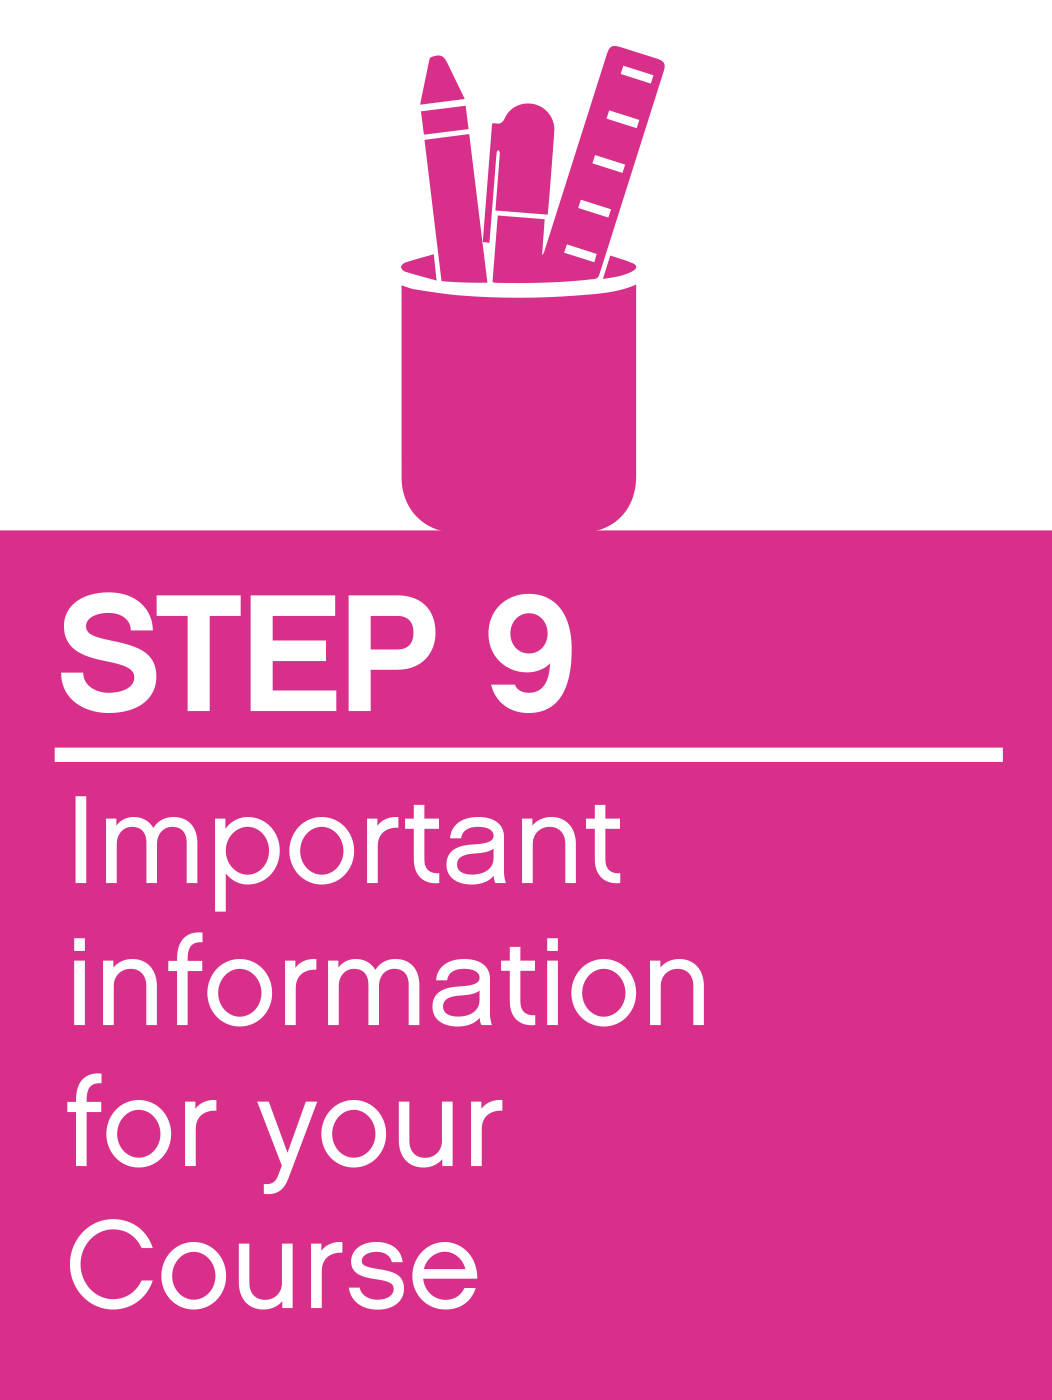  Step 9: Important Information for your course